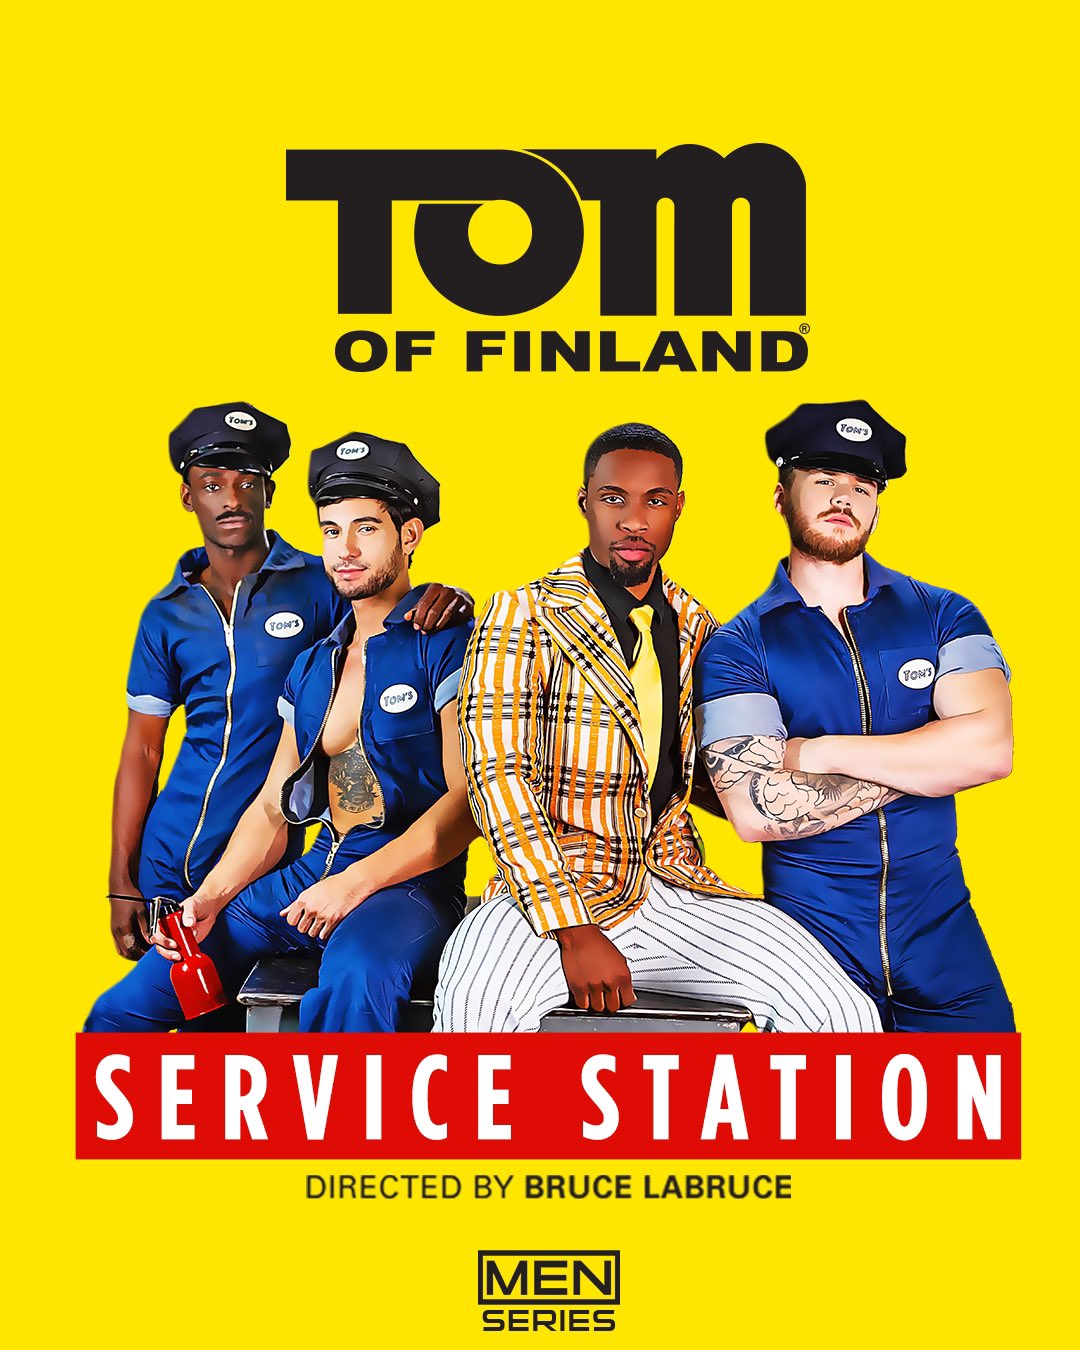 X 上的Bruce LaBruce：「Out today on https://t.co/JP1tYiBfl9! Tom of Finland: SERVICE  STATION Starring @MatthewCampNYC @DeAngeloJxxx @RickyRoman91  @TheRiverWilson Directed by @BruceLaBruce Jan 24 | #ToFxMEN @TomsFoundation  https://t.co/D2TMFdOTe6」 / X